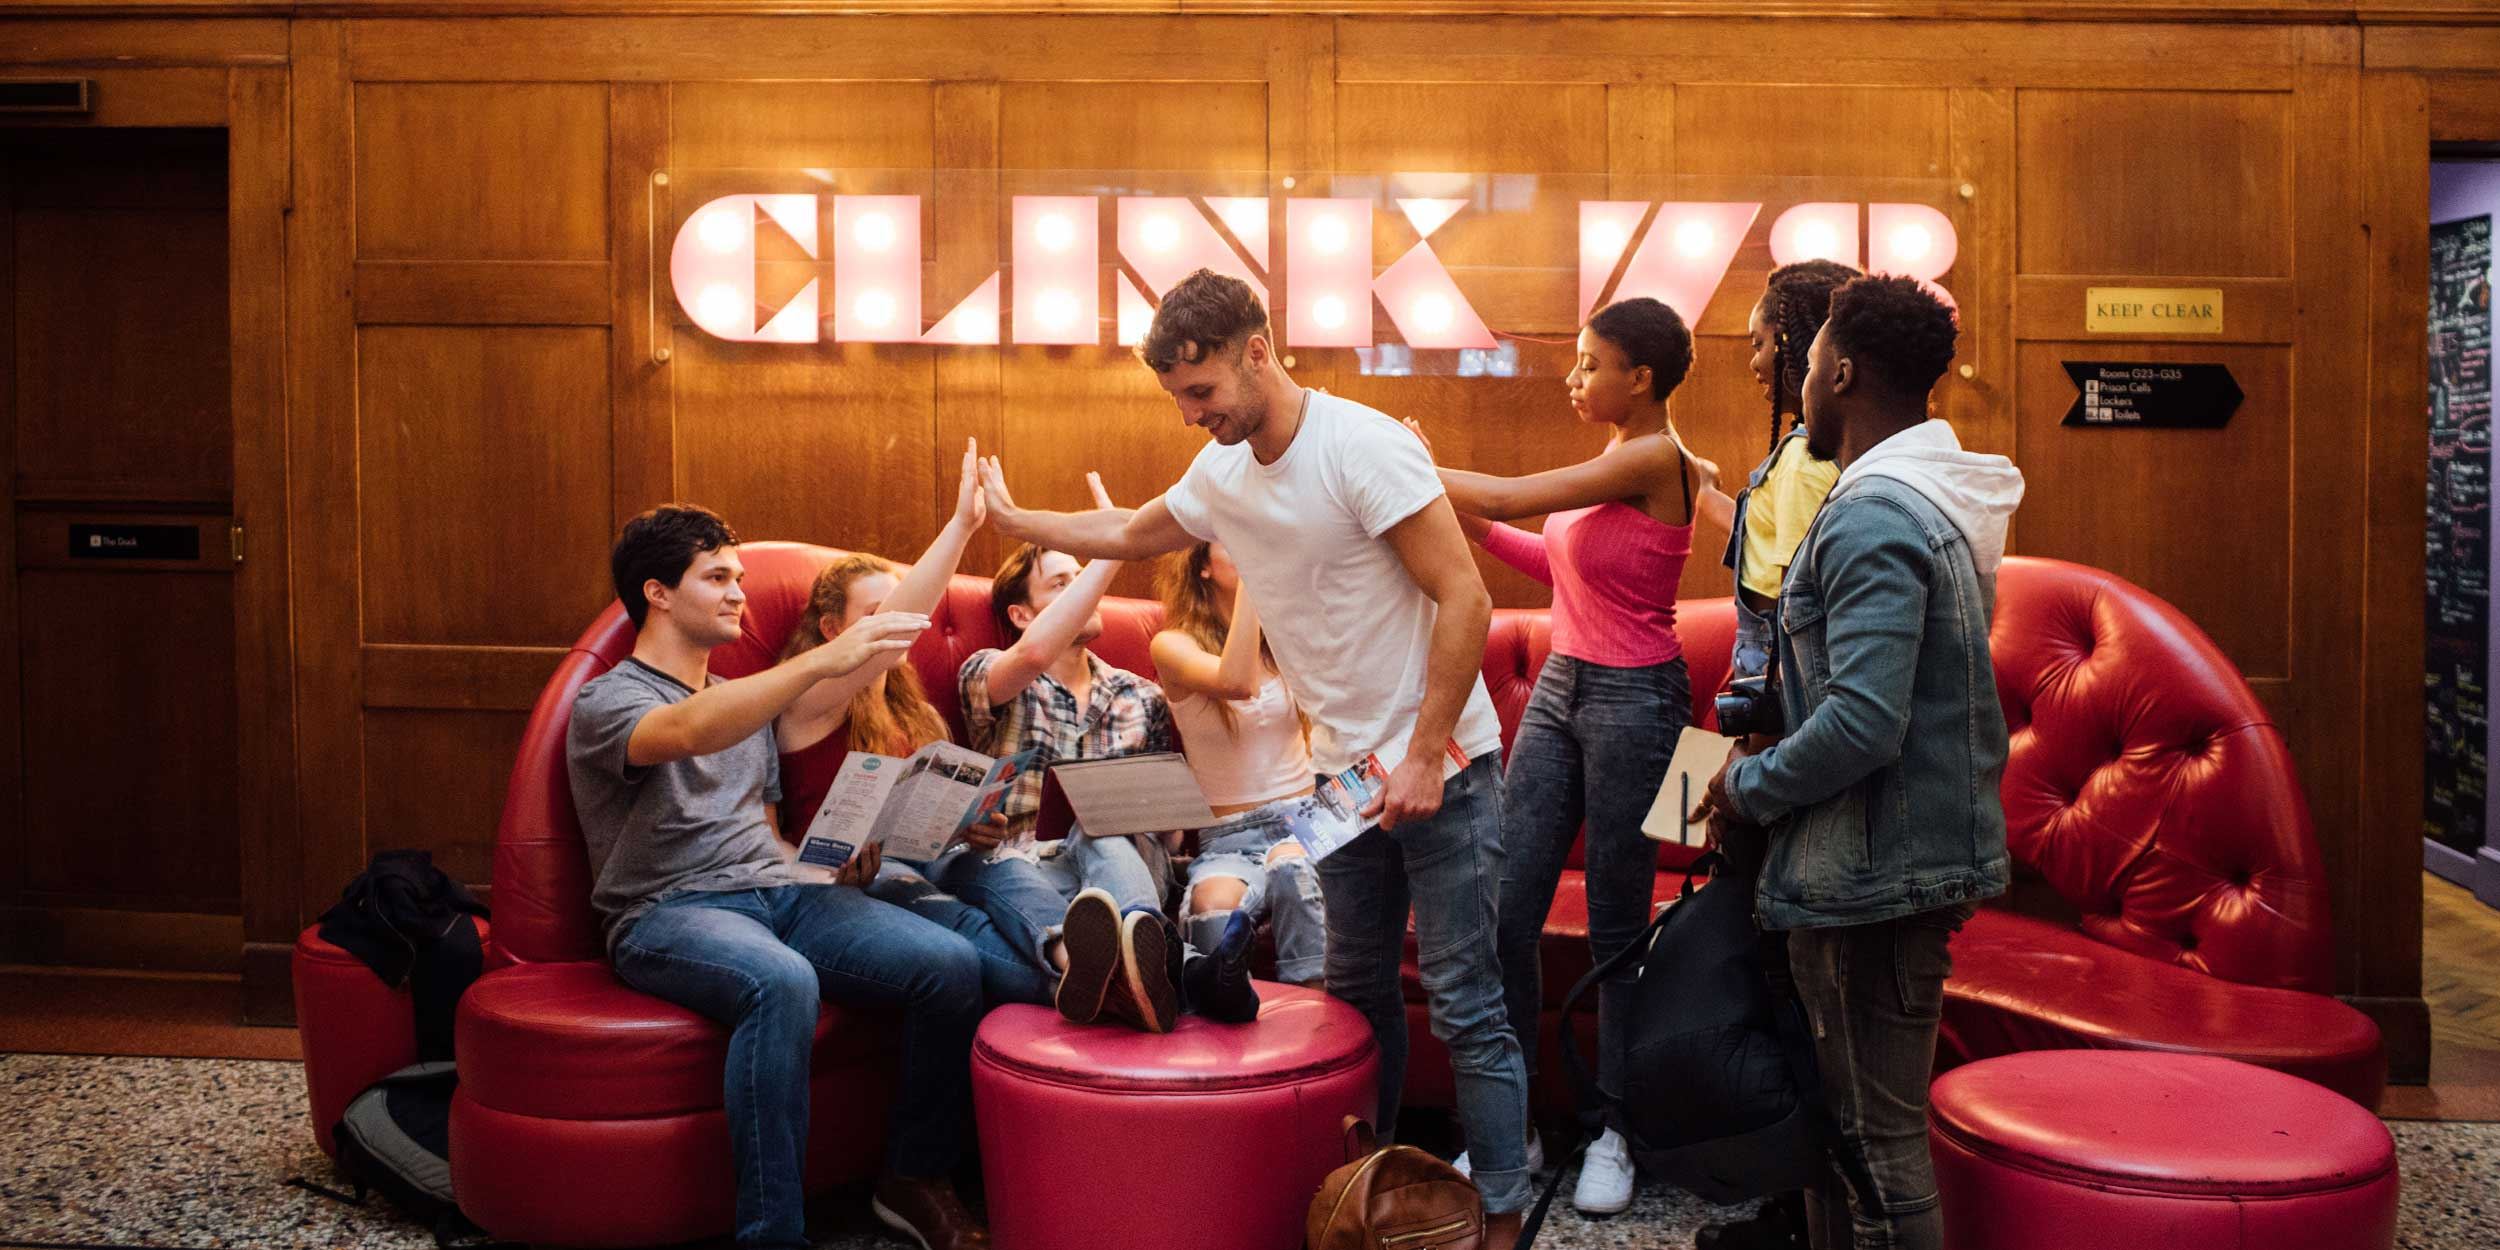 Guests lounging at CLINK78 hostel in London